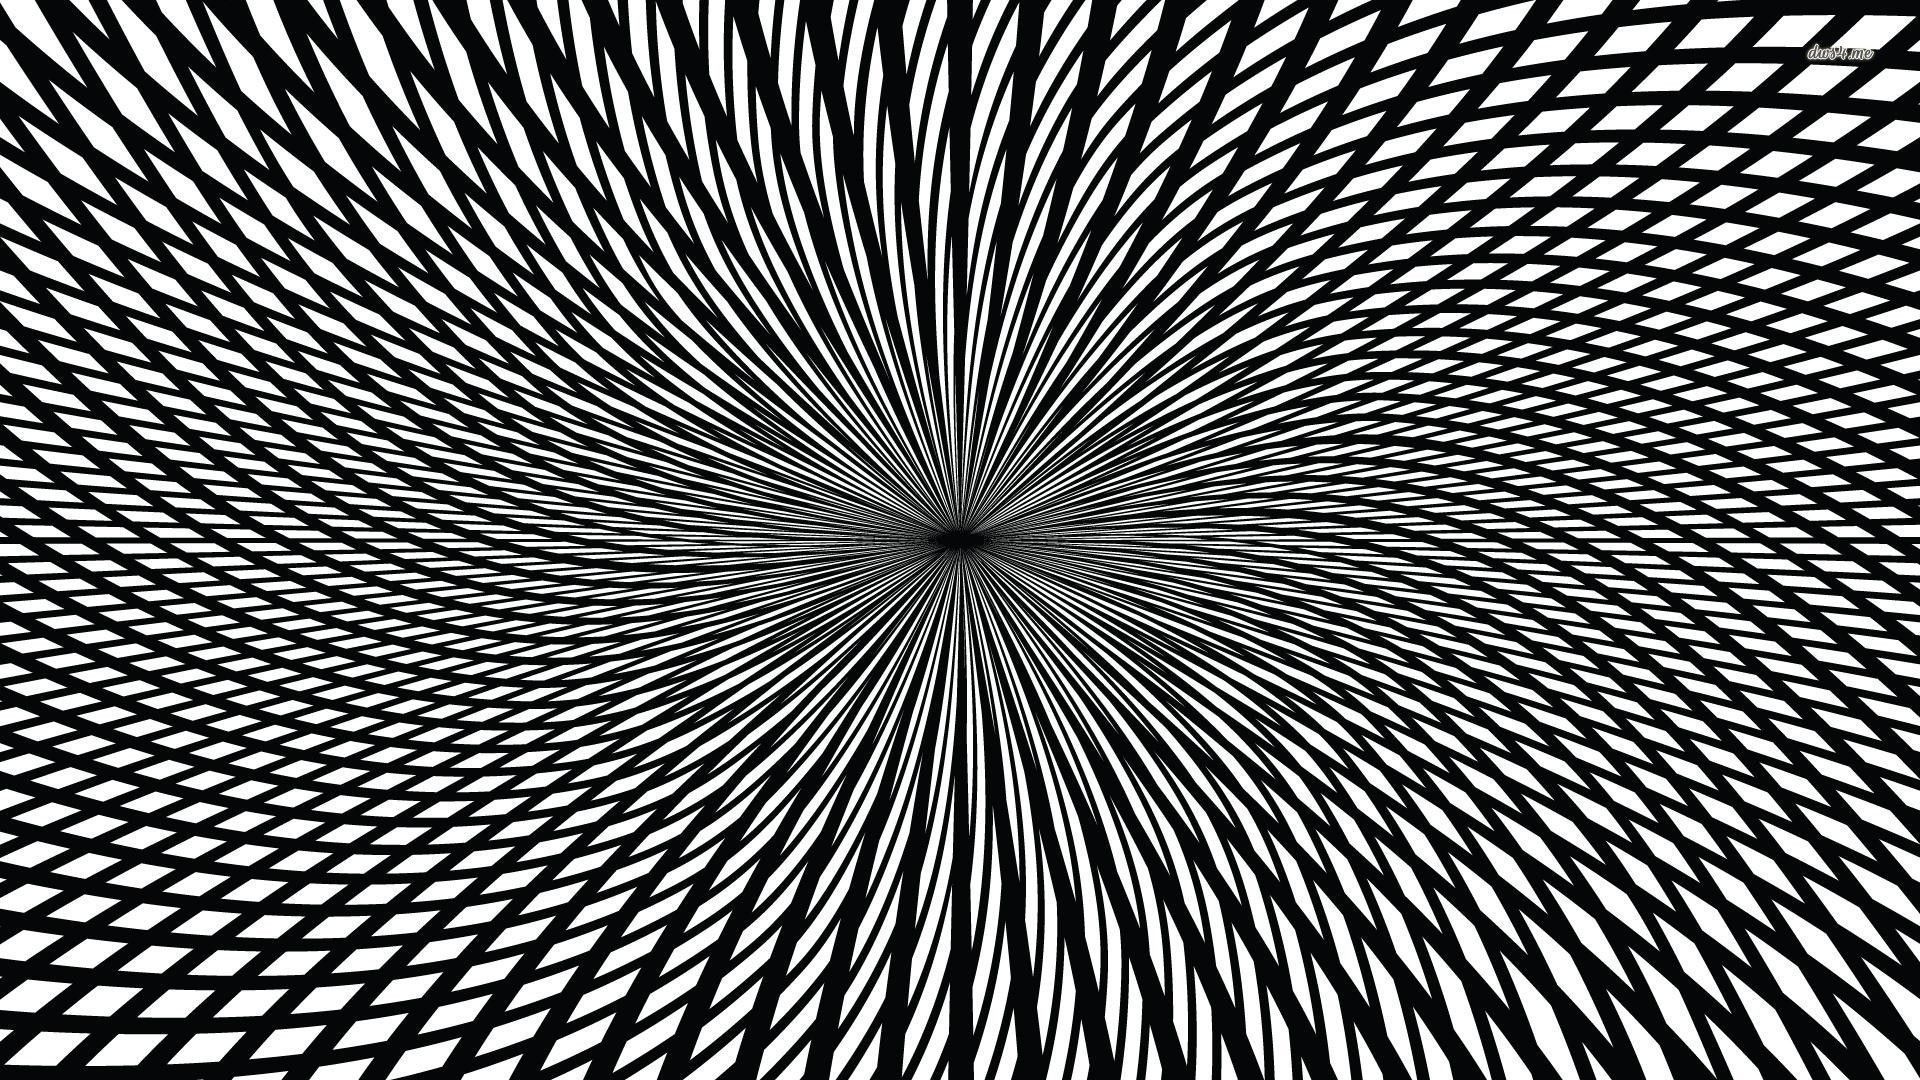 Optical illusion wallpaper - Abstract wallpapers